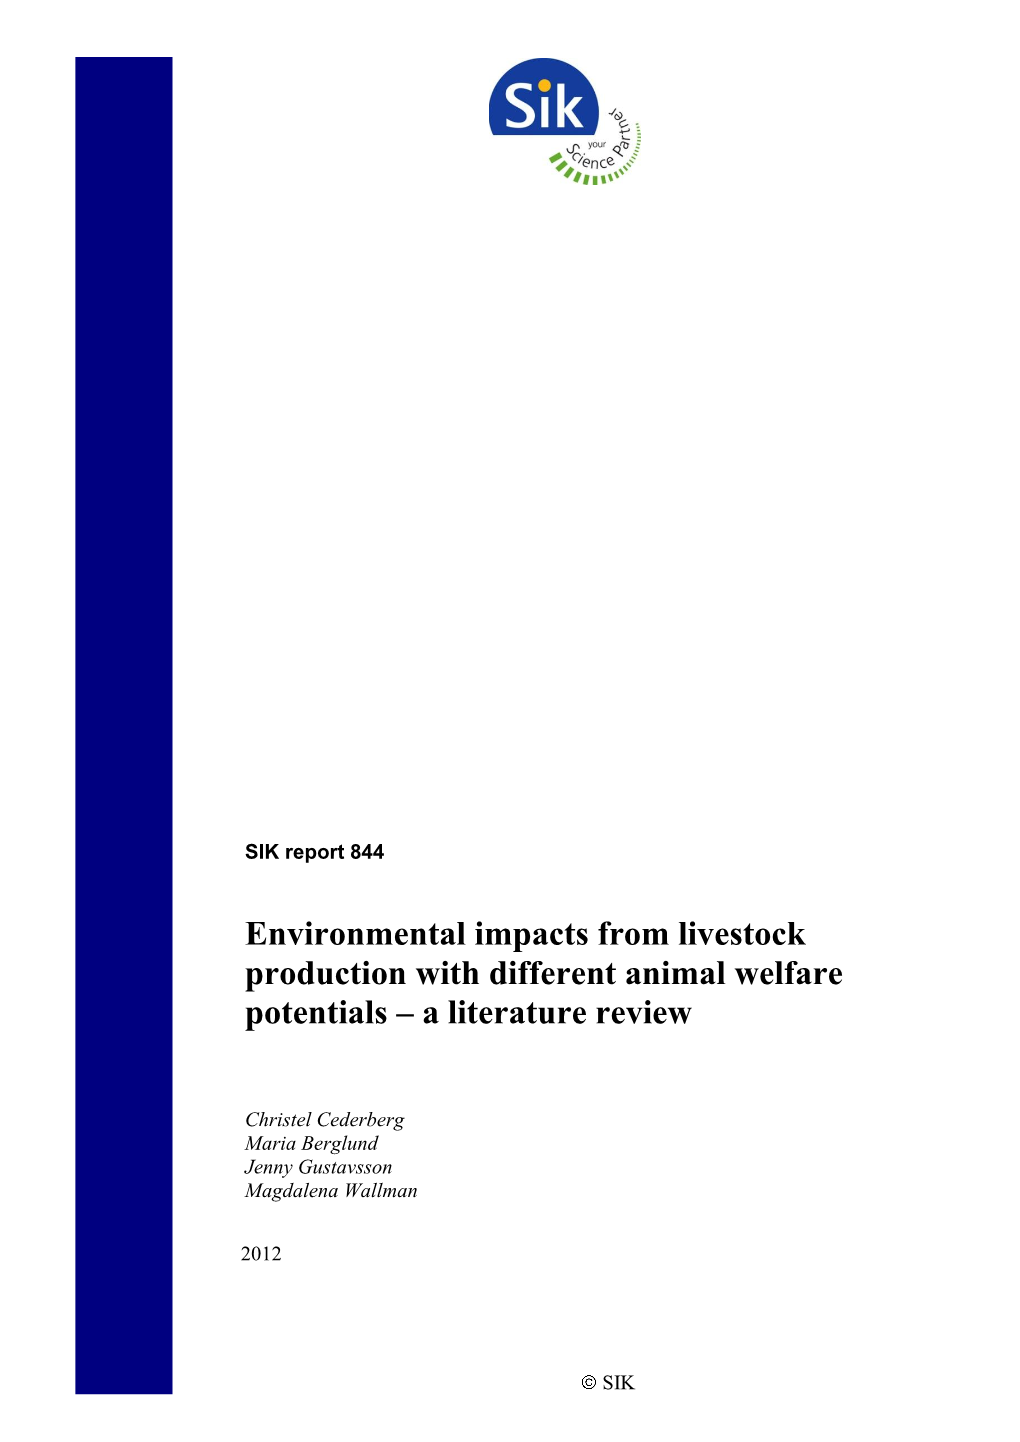 Environmental Impacts from Livestock Production with Different Animal Welfare Potentials – a Literature Review